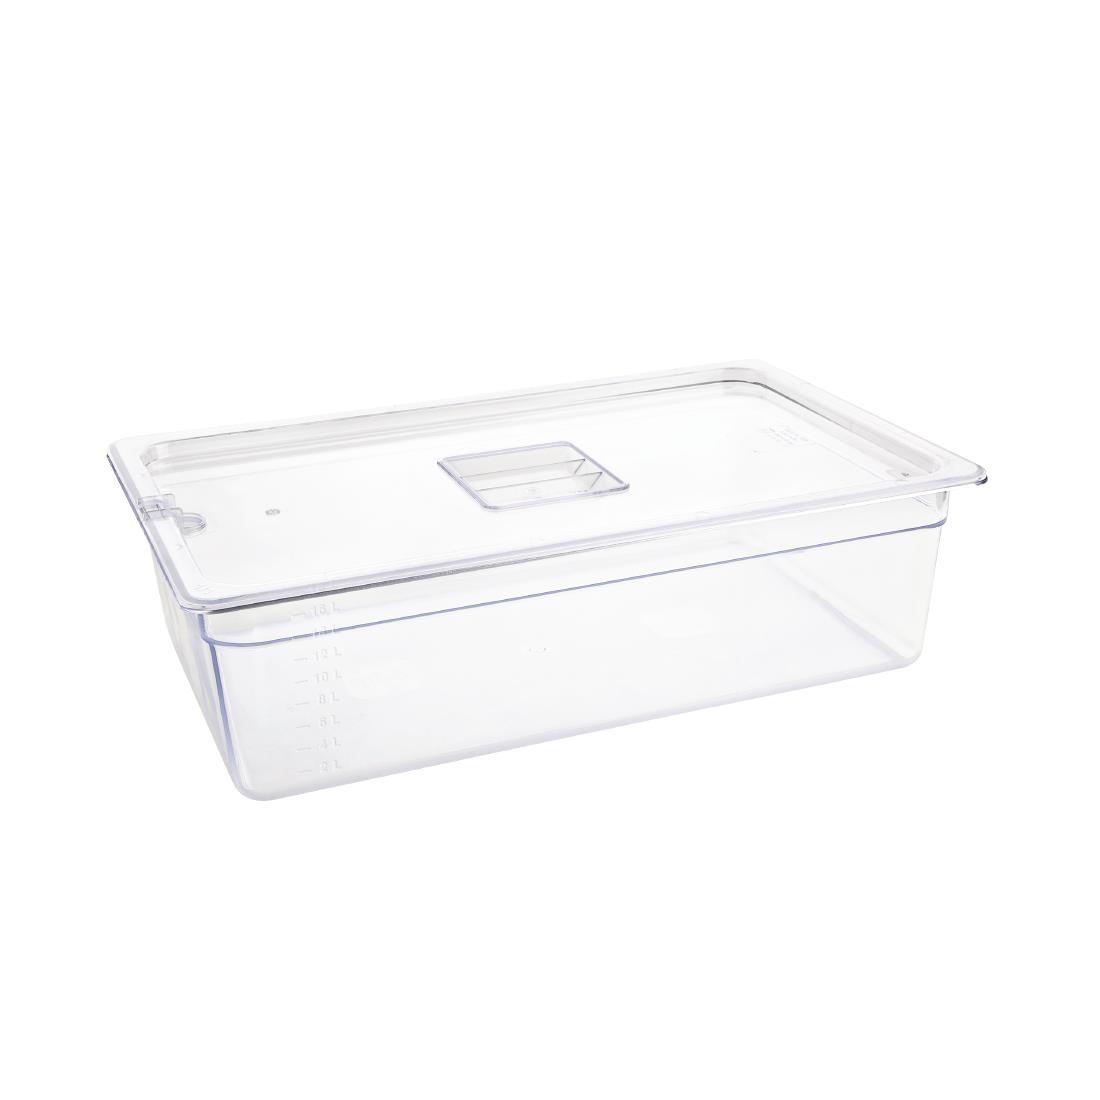 Vogue Polycarbonate 1/1 Gastronorm Container 150mm Clear - U226  - 3